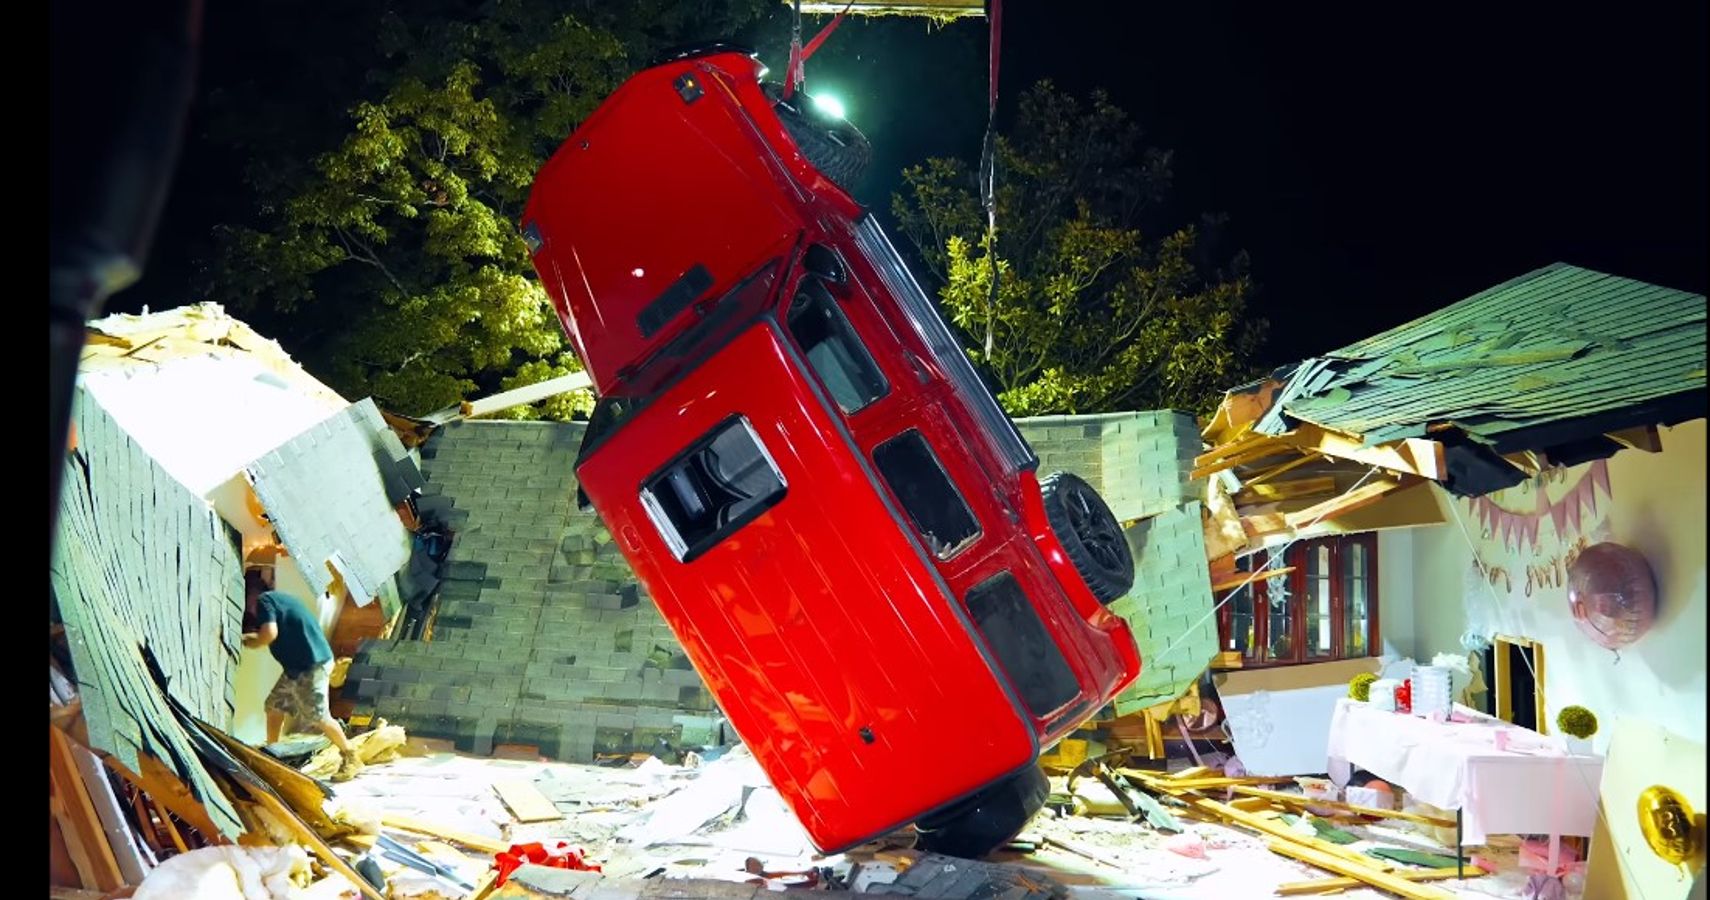 Mercedes G Wagon hanging from one strap after falling through roof